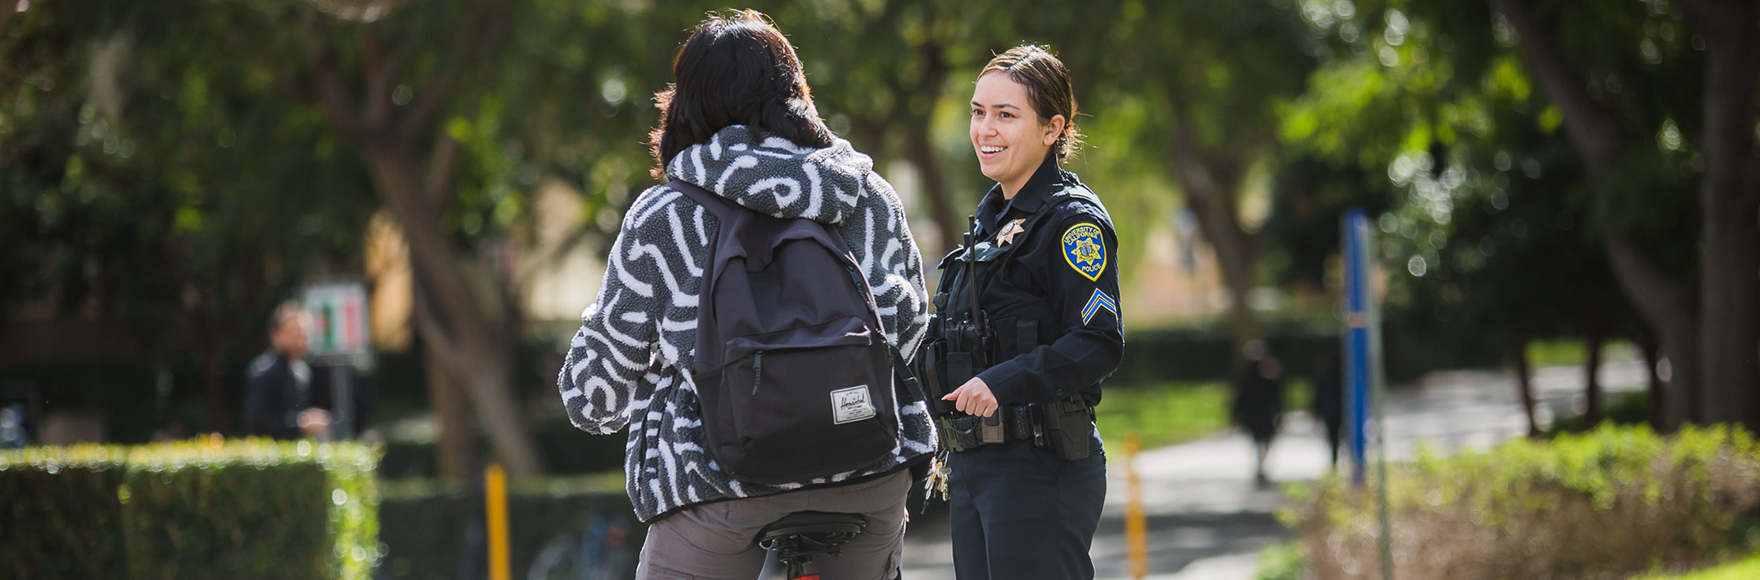 Officer smiling and speaking to student on UCI Ring Road